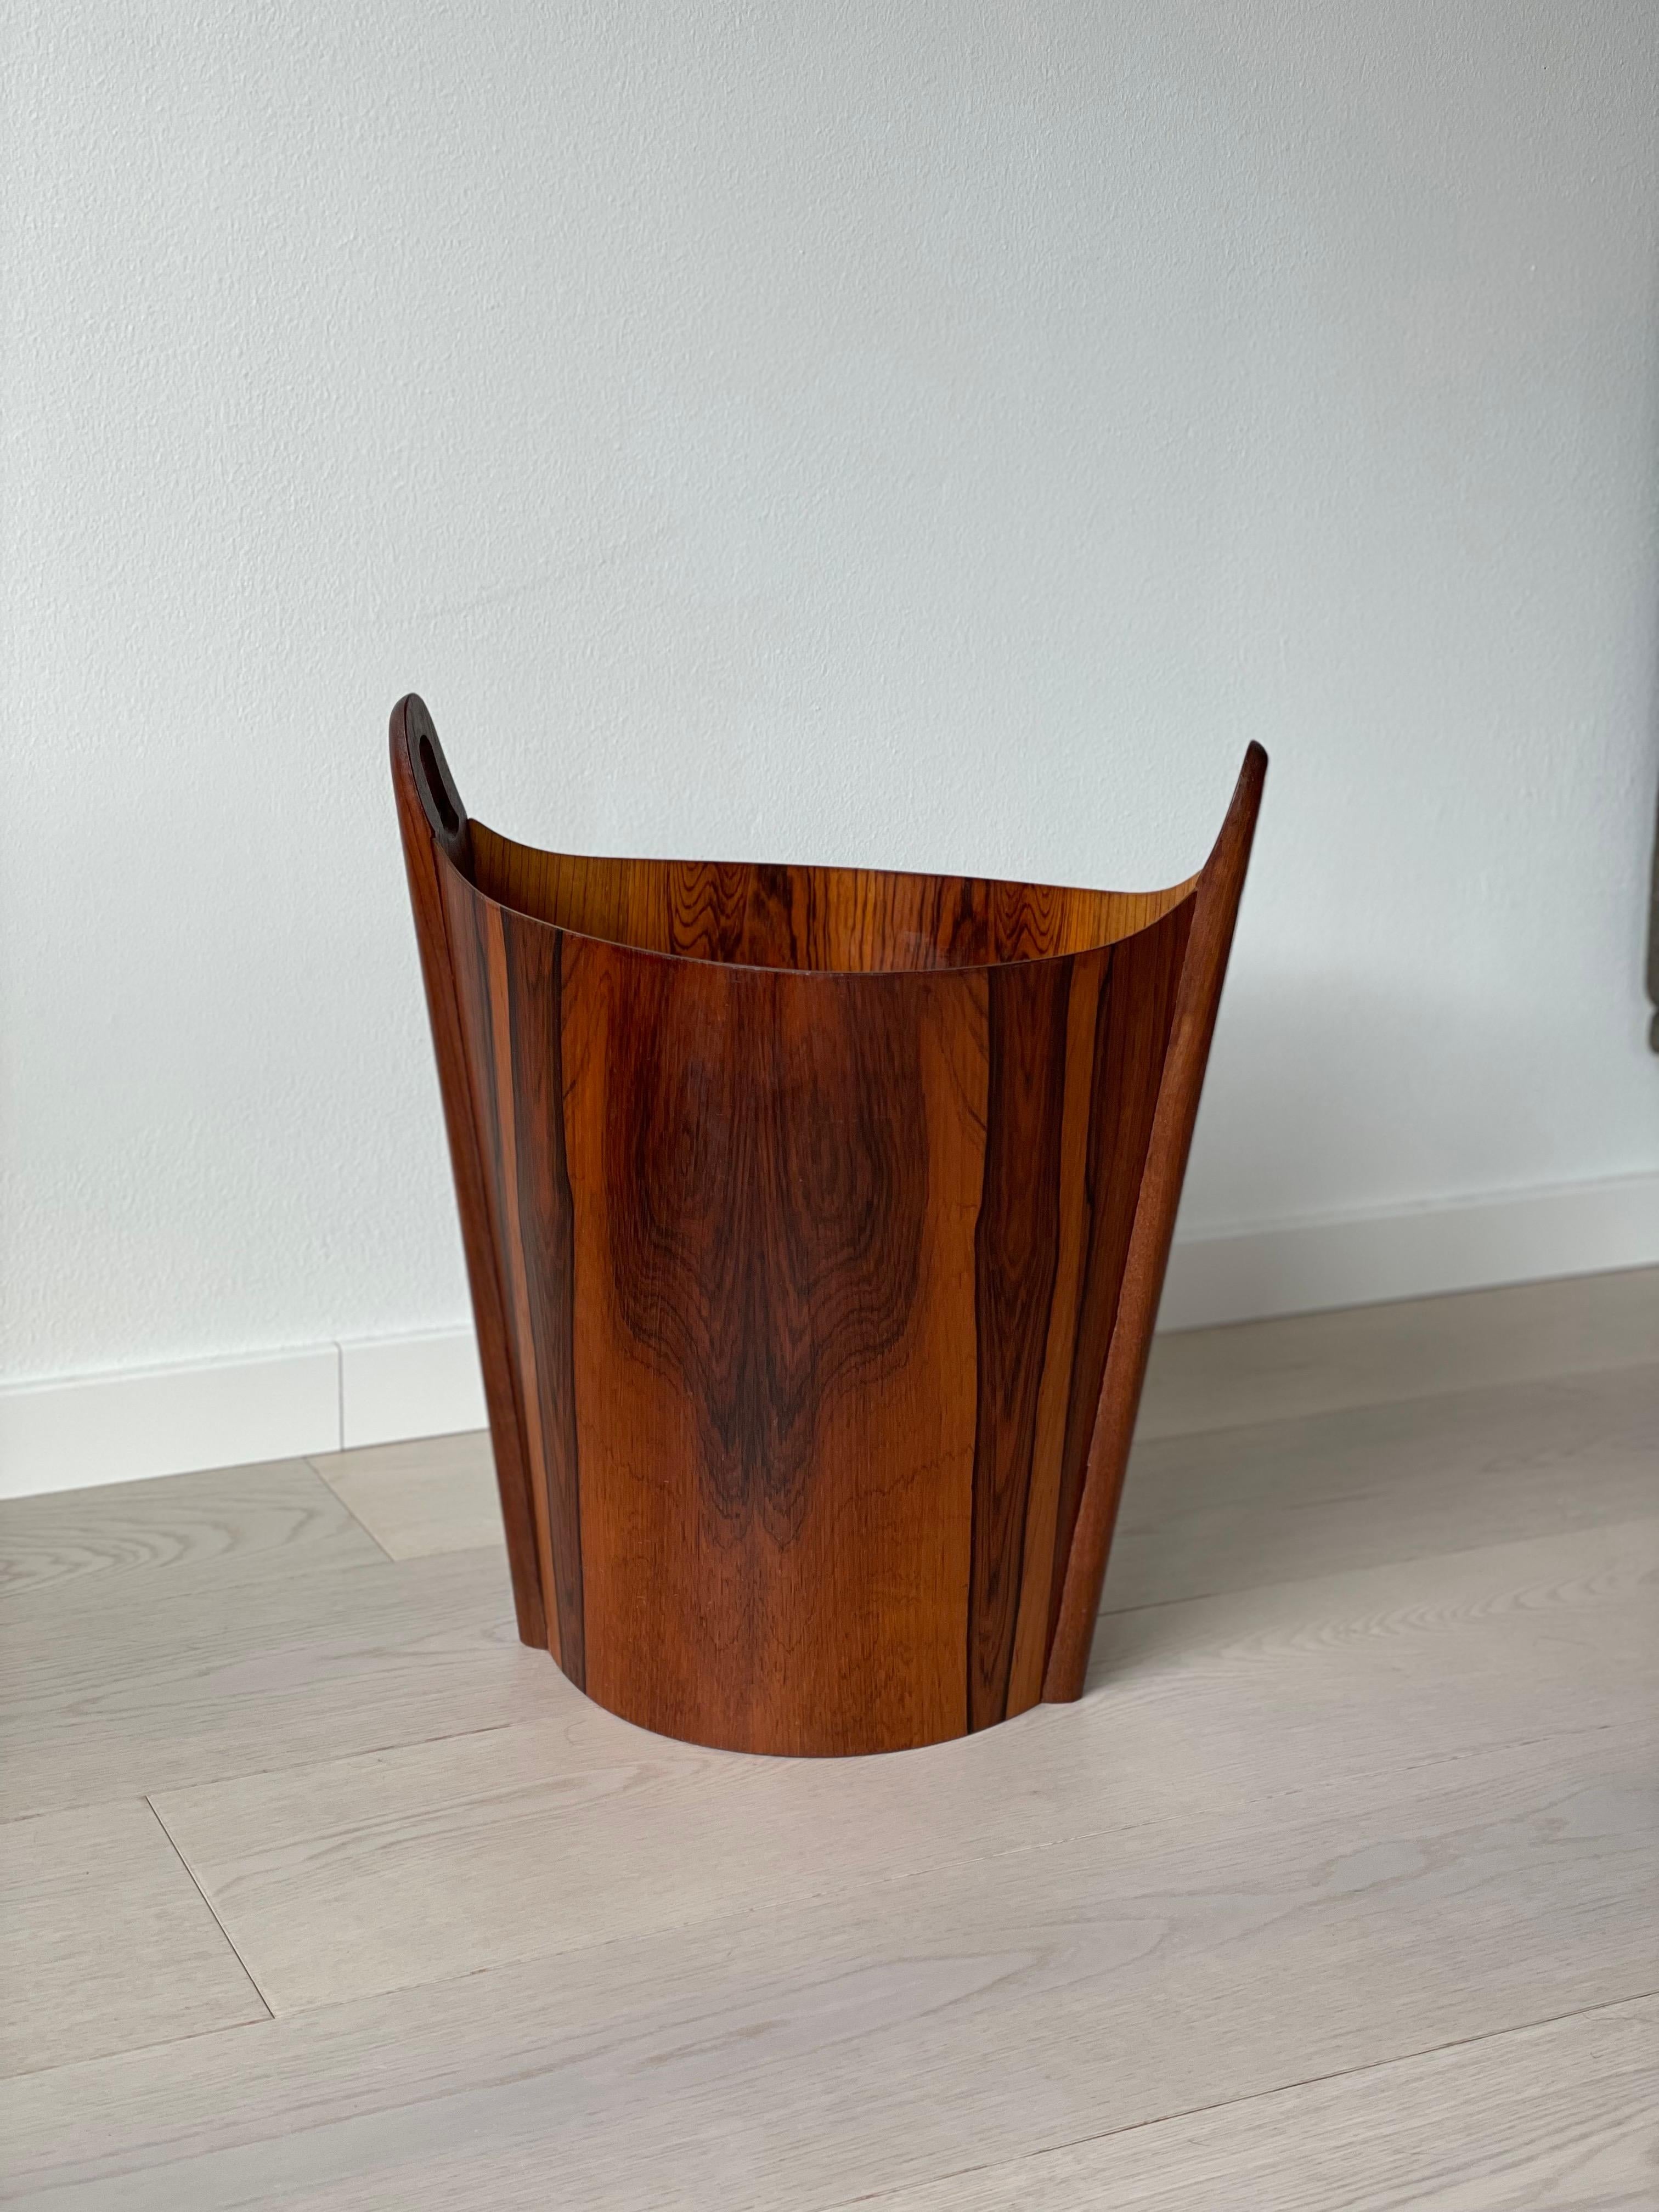 A beautiful rosewood paper bin designed by Einar Barnes in the 1960s, manufactured by P.S. Heggen, Norway.

The bin is in very good condition with beautiful rosewood grain.

